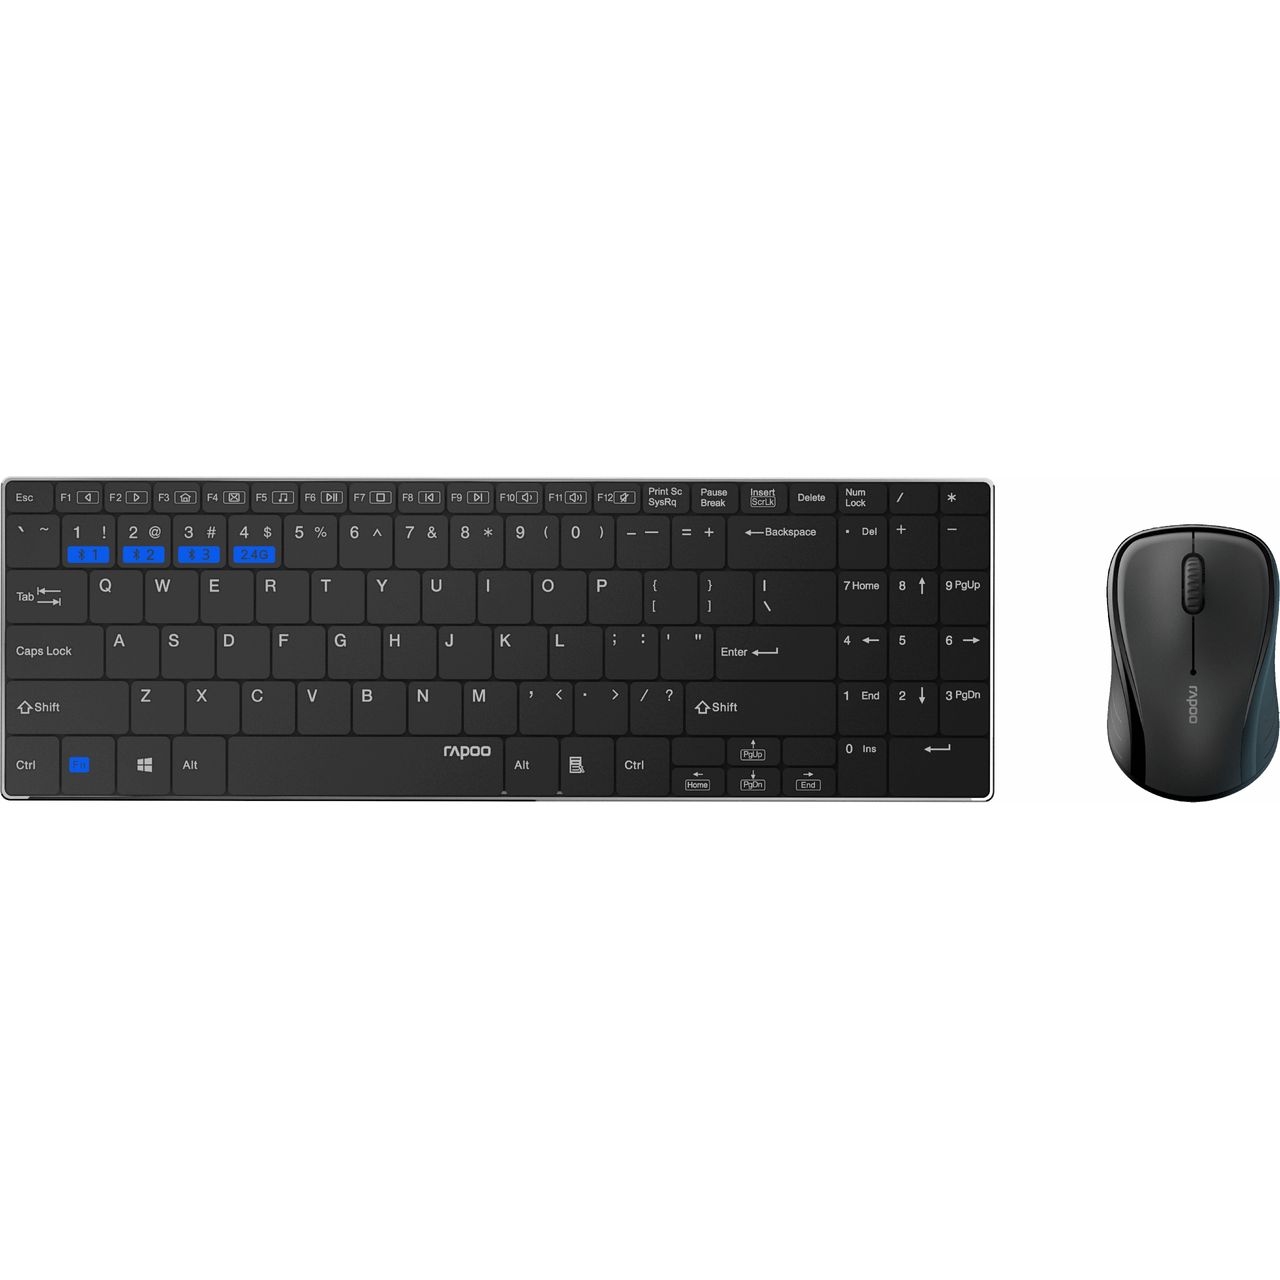 Rapoo 9060M Multi-Mode Ultra-Slim Bluetooth / Wireless USB Keyboard with Optical Mouse Review